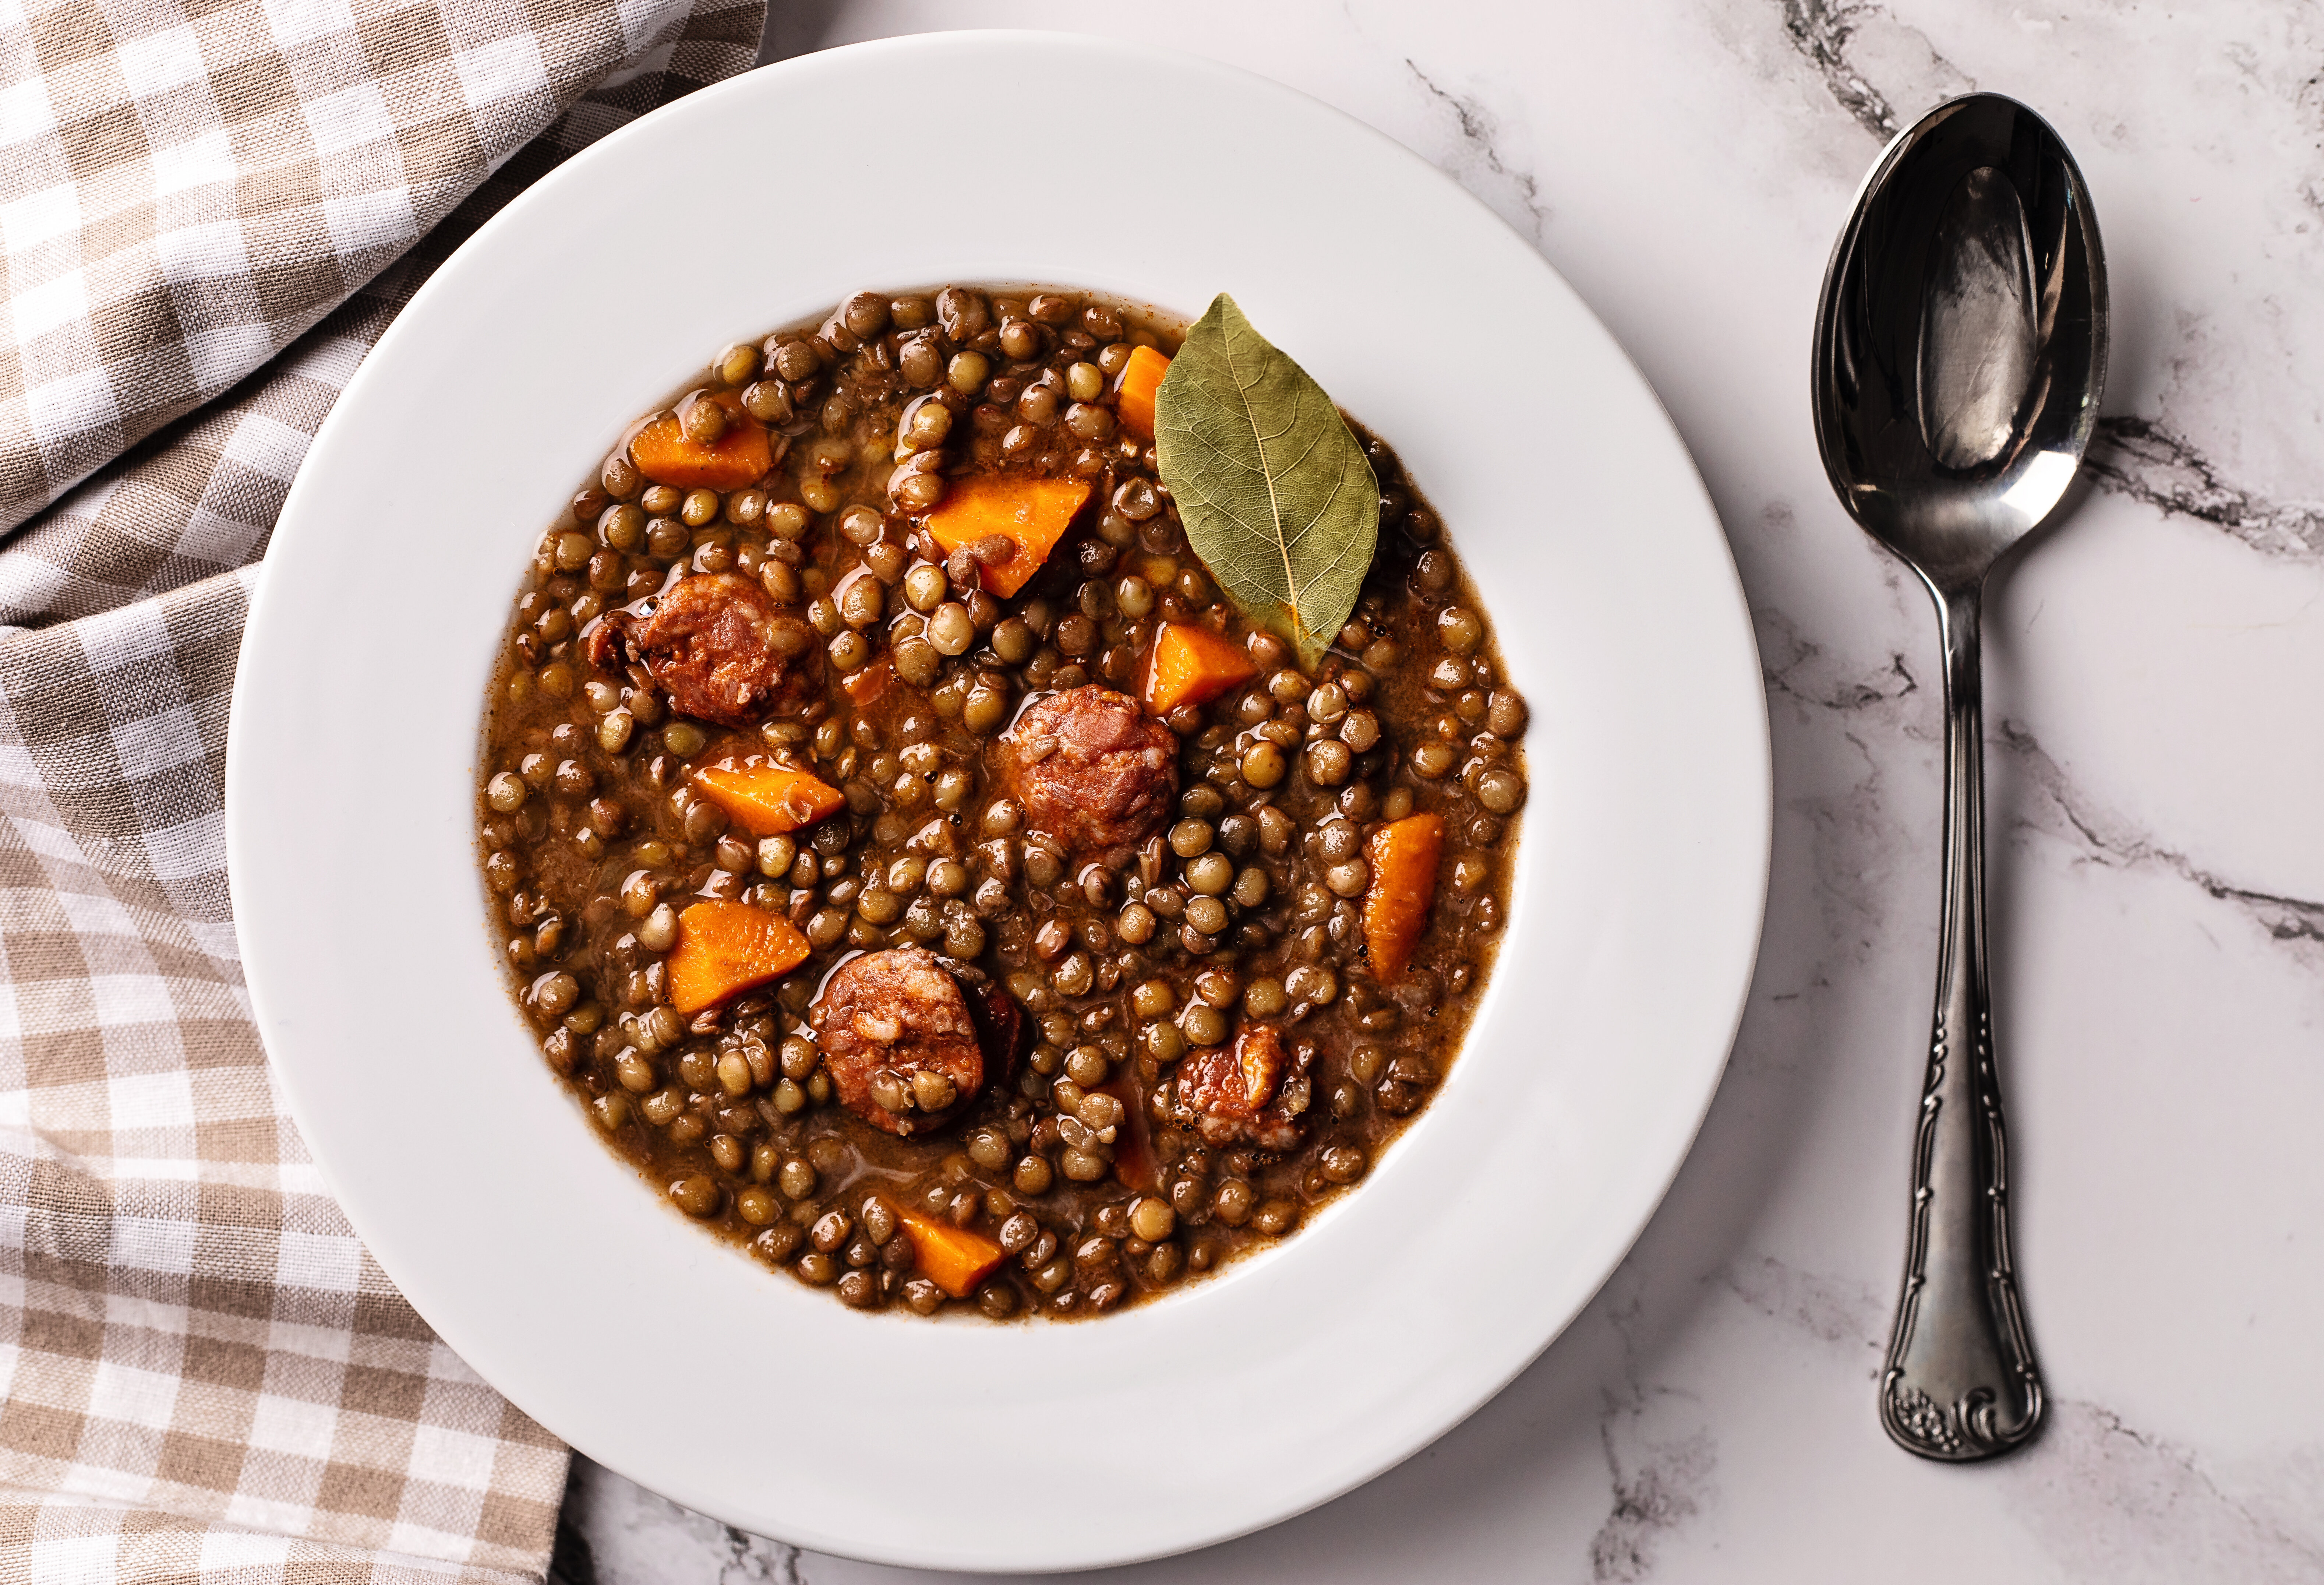 A bowl of lentil stew with chunks of sausage and carrot, served on a white plate with a spoon on the side